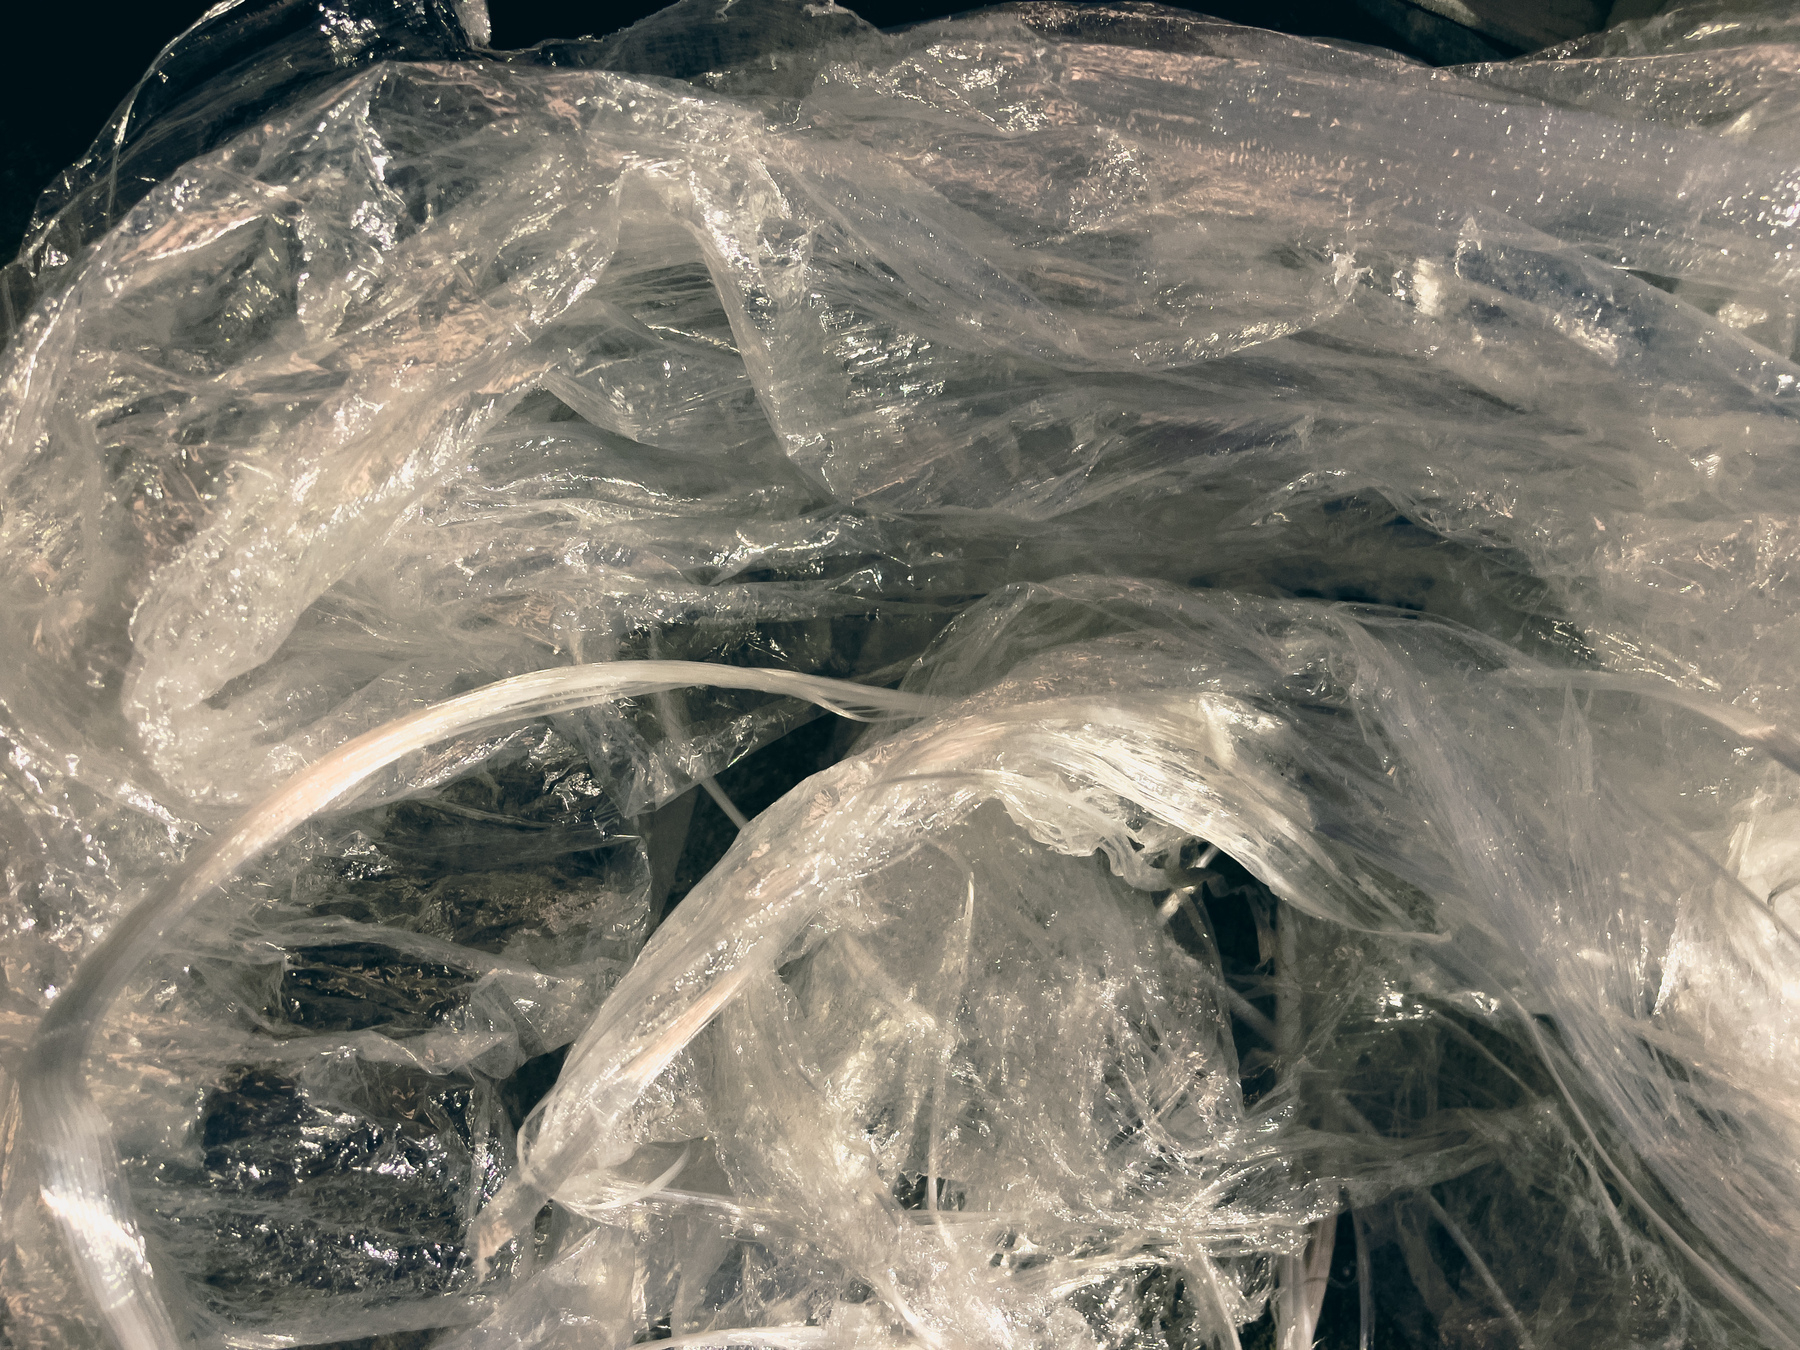 Closeup of plastic wrapping.